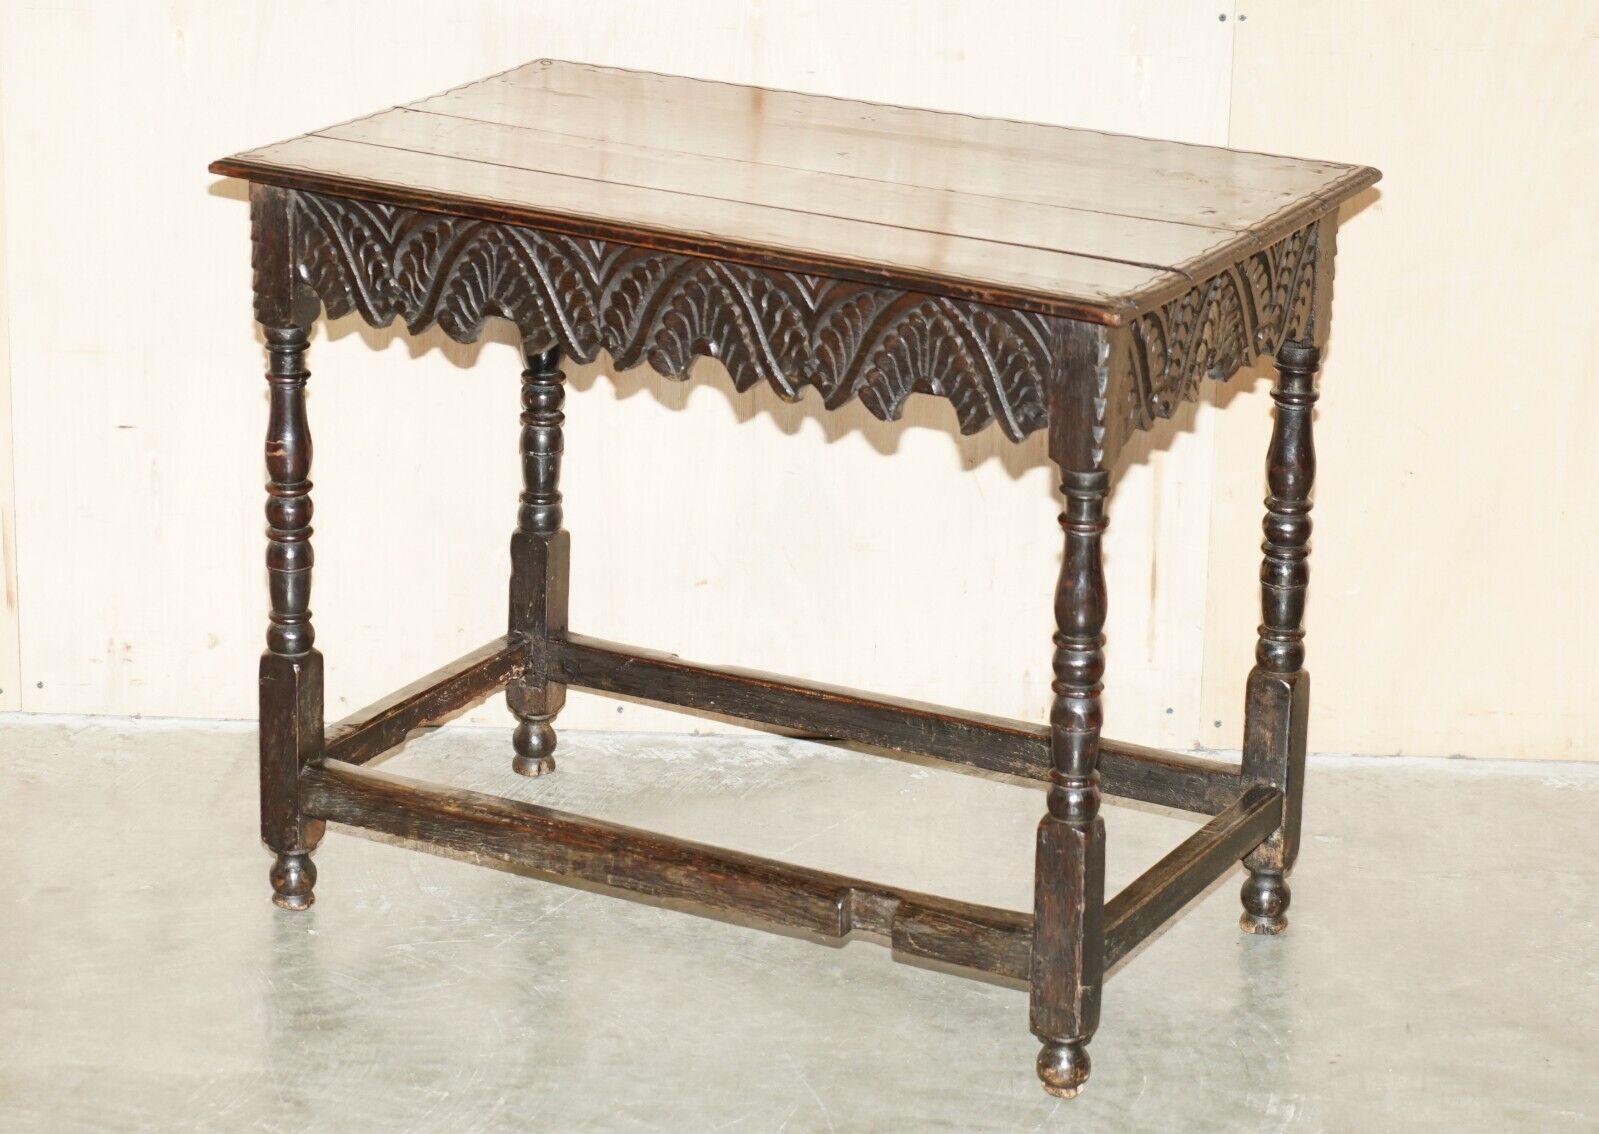 ANTIQUE ENGLISH 18TH CENTURY JACOBEAN CENTRE TABLE WITH ORNATELY CARVED APRON